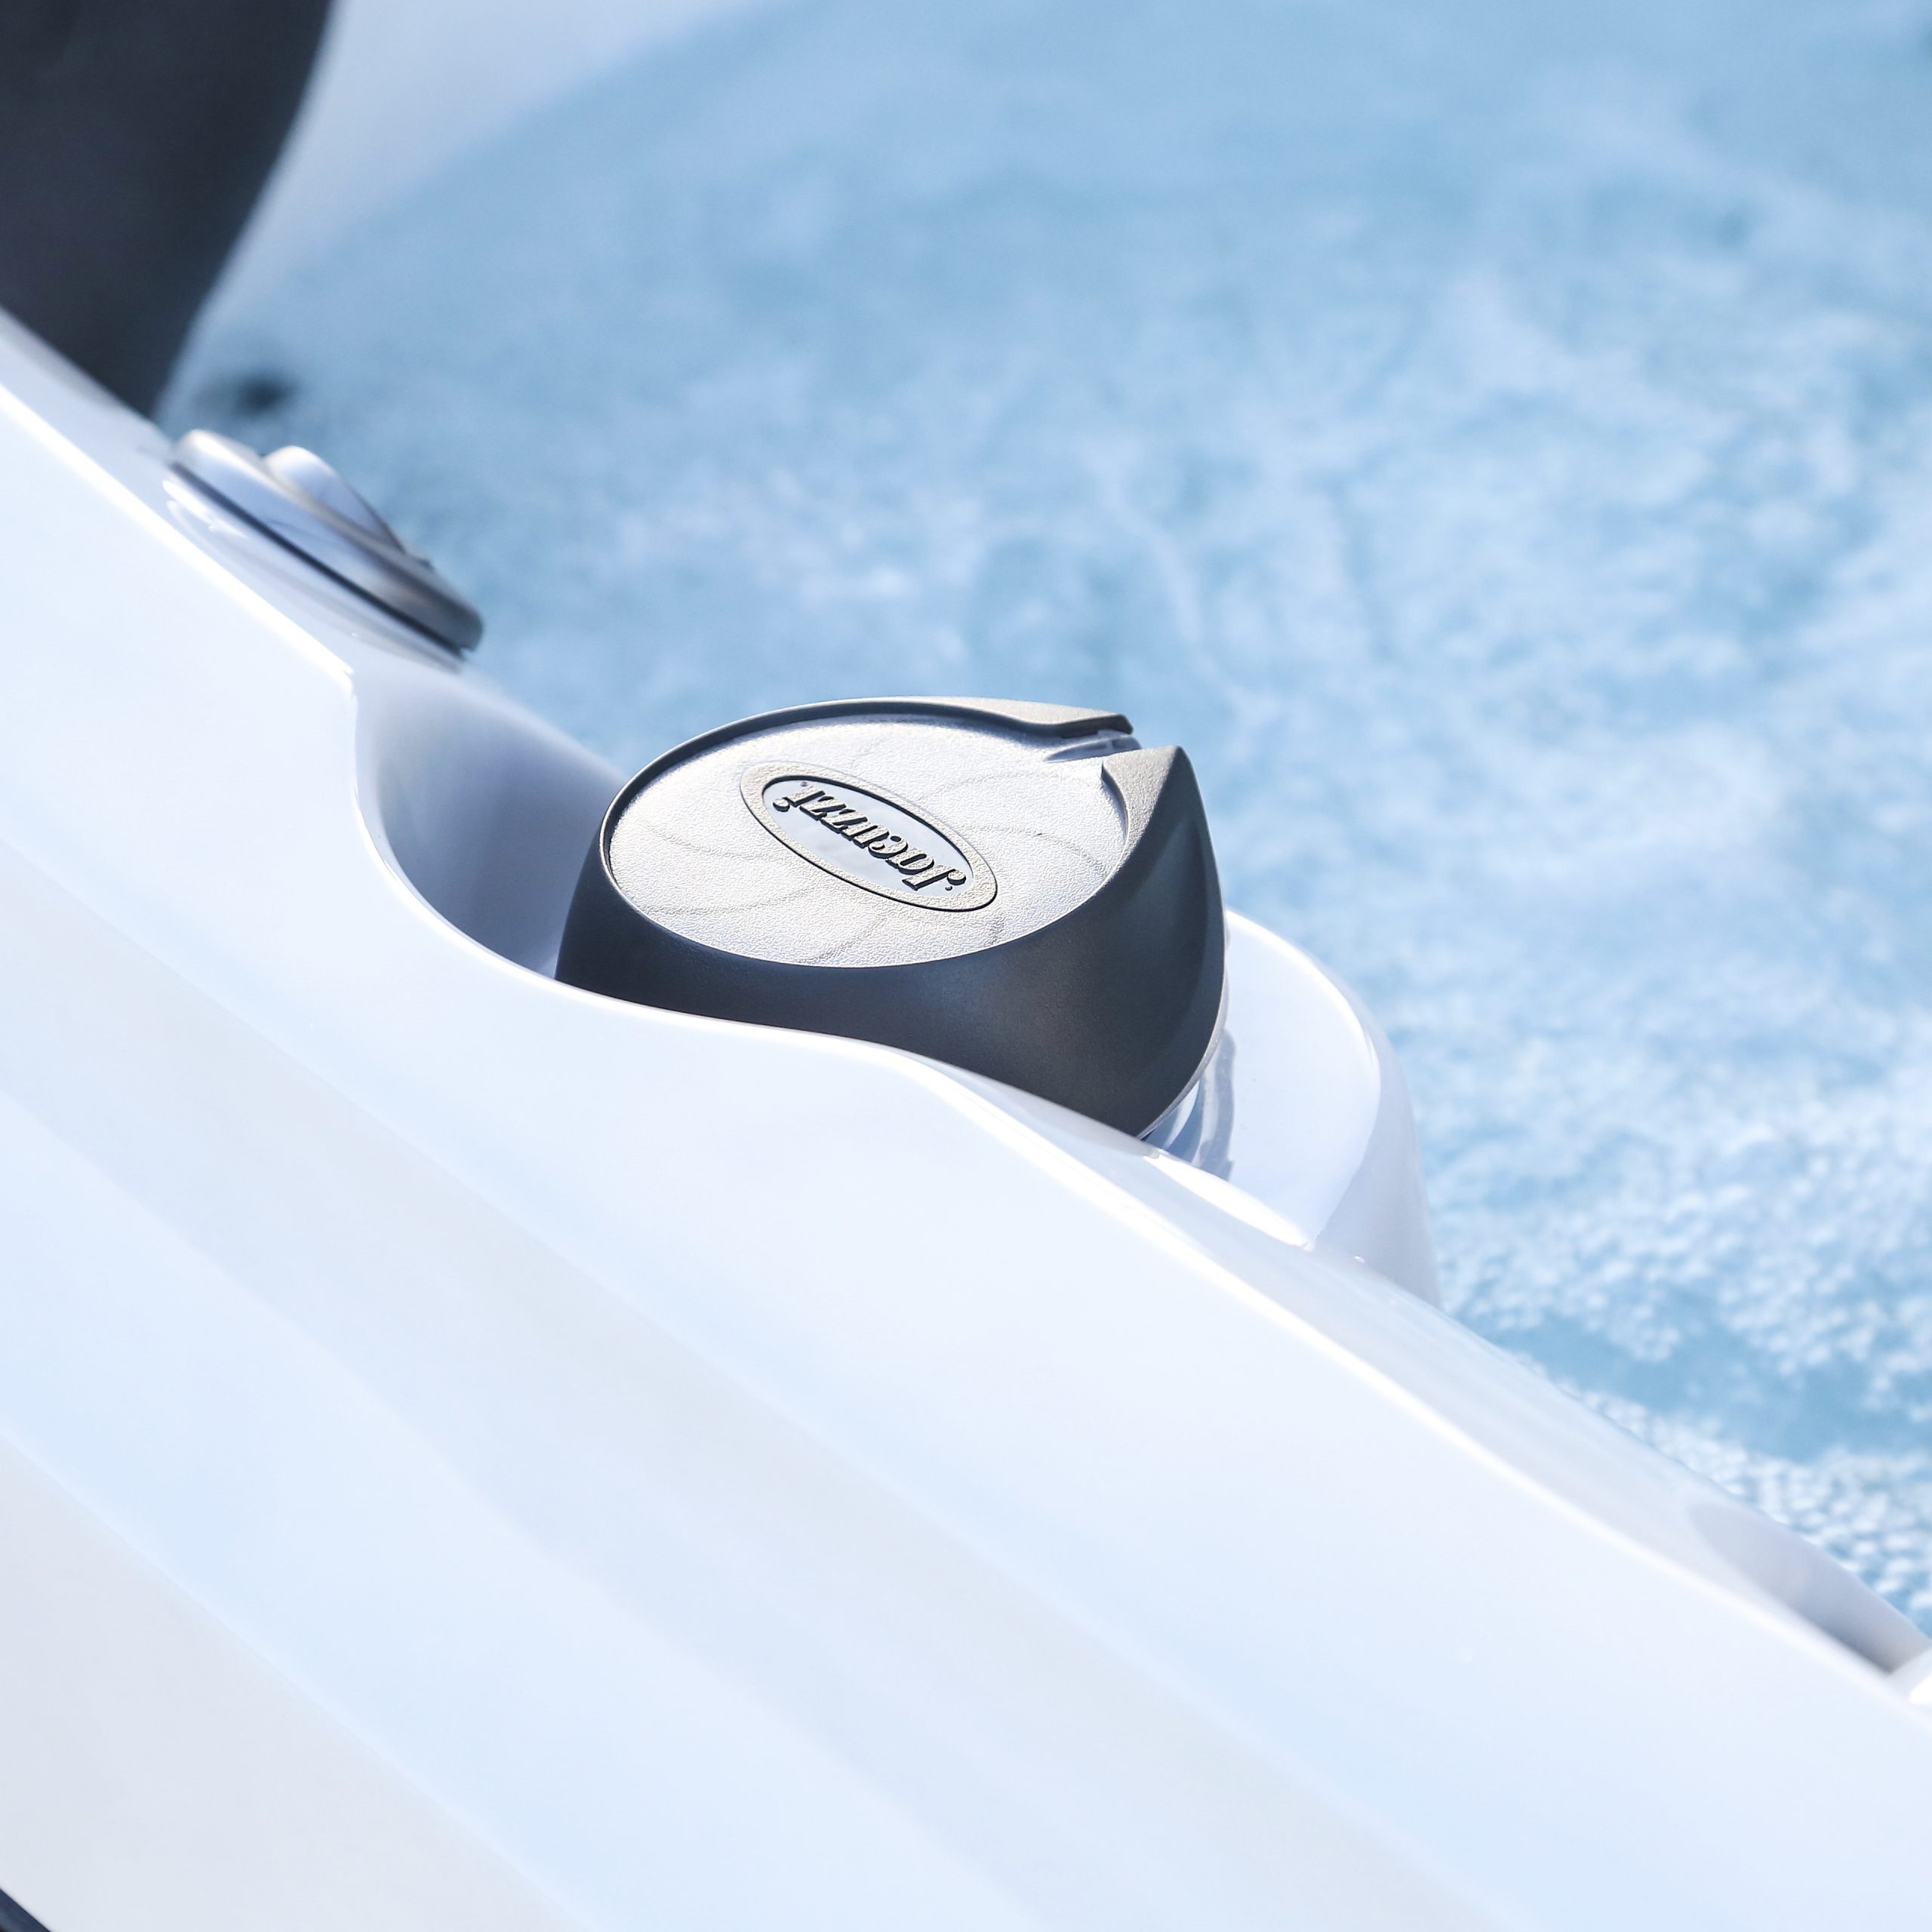 J-400™️ Hot Tub Collection Features